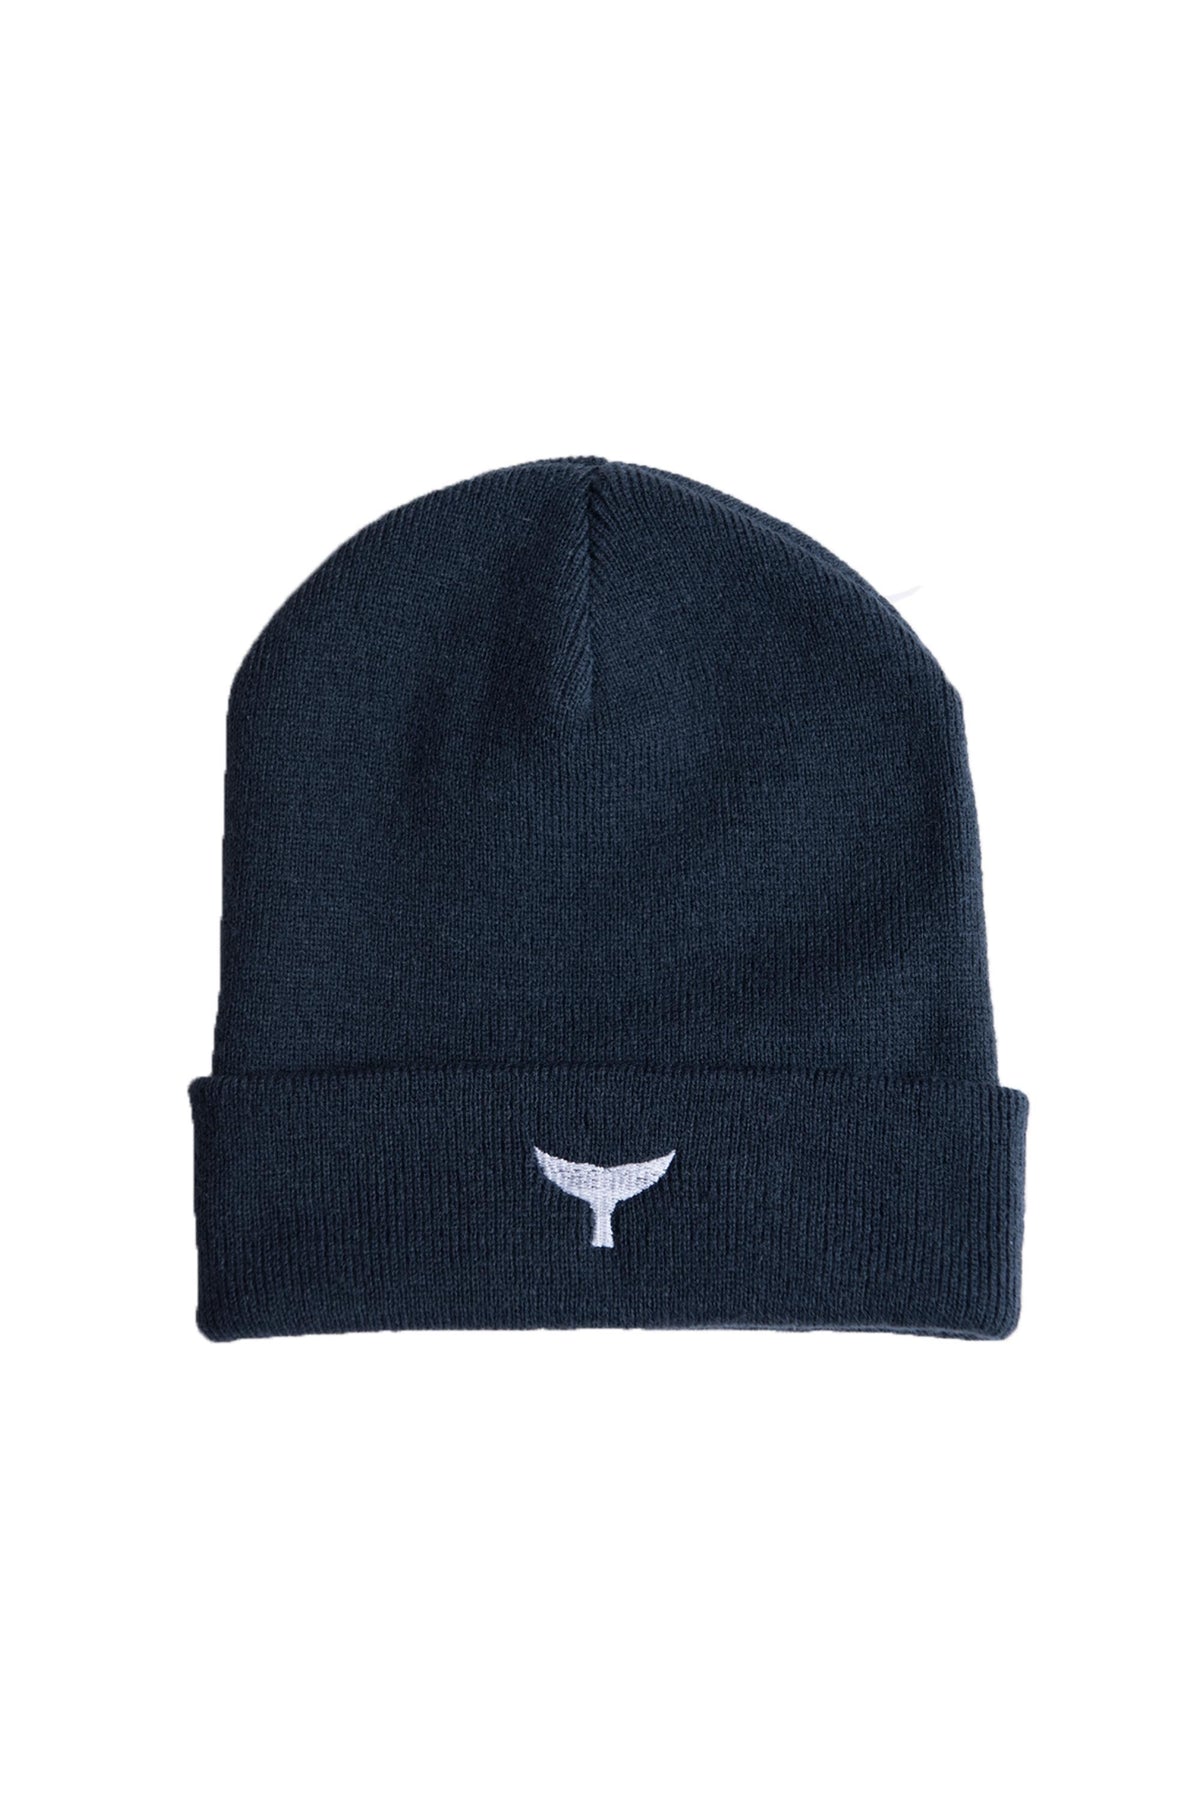 Beanie - Navy - Whale Of A Time Clothing